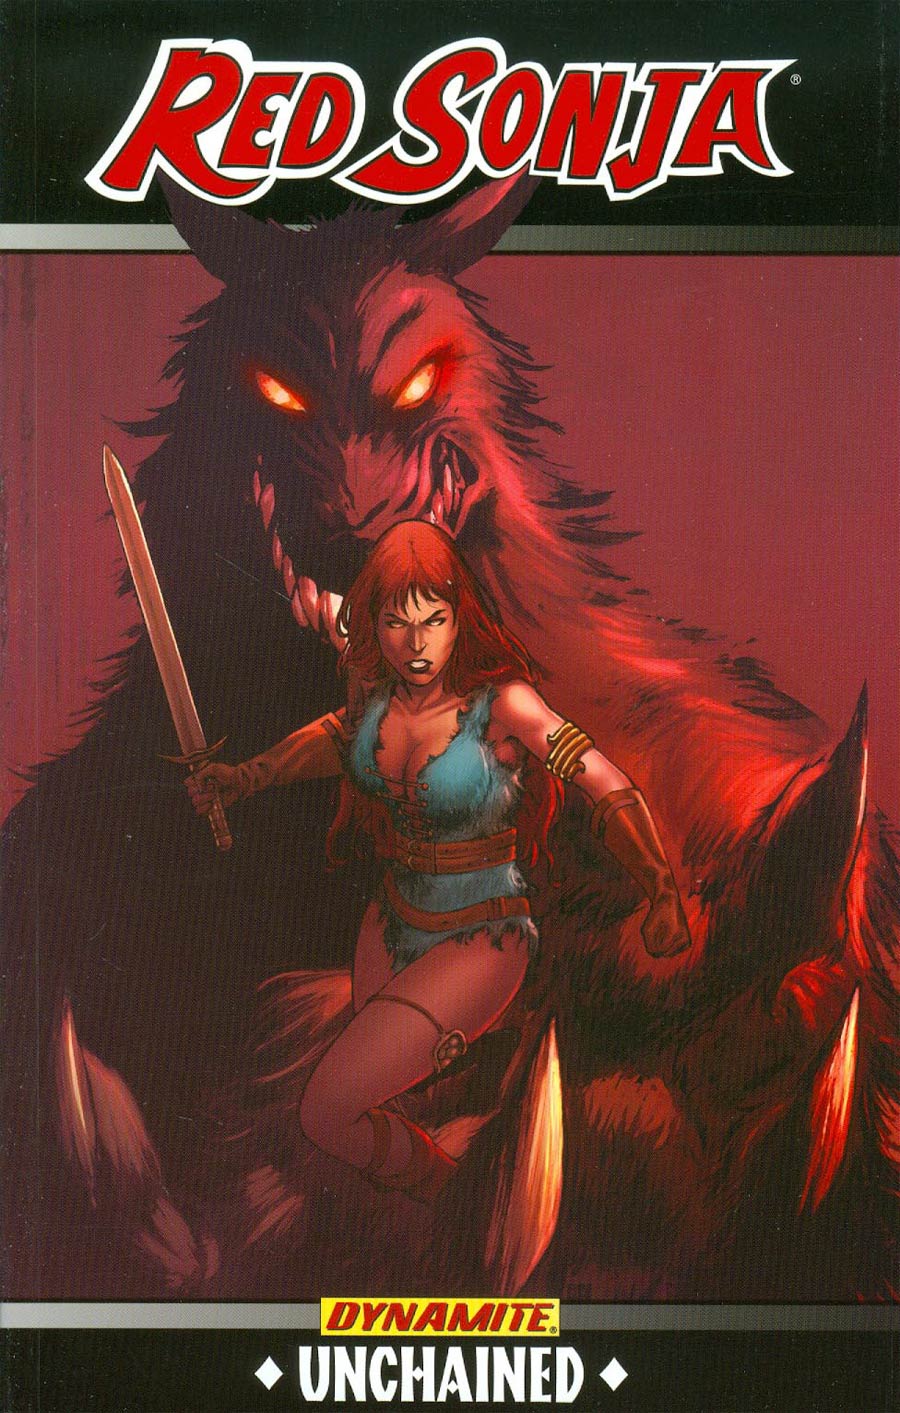 Red Sonja Unchained Vol 1 TP